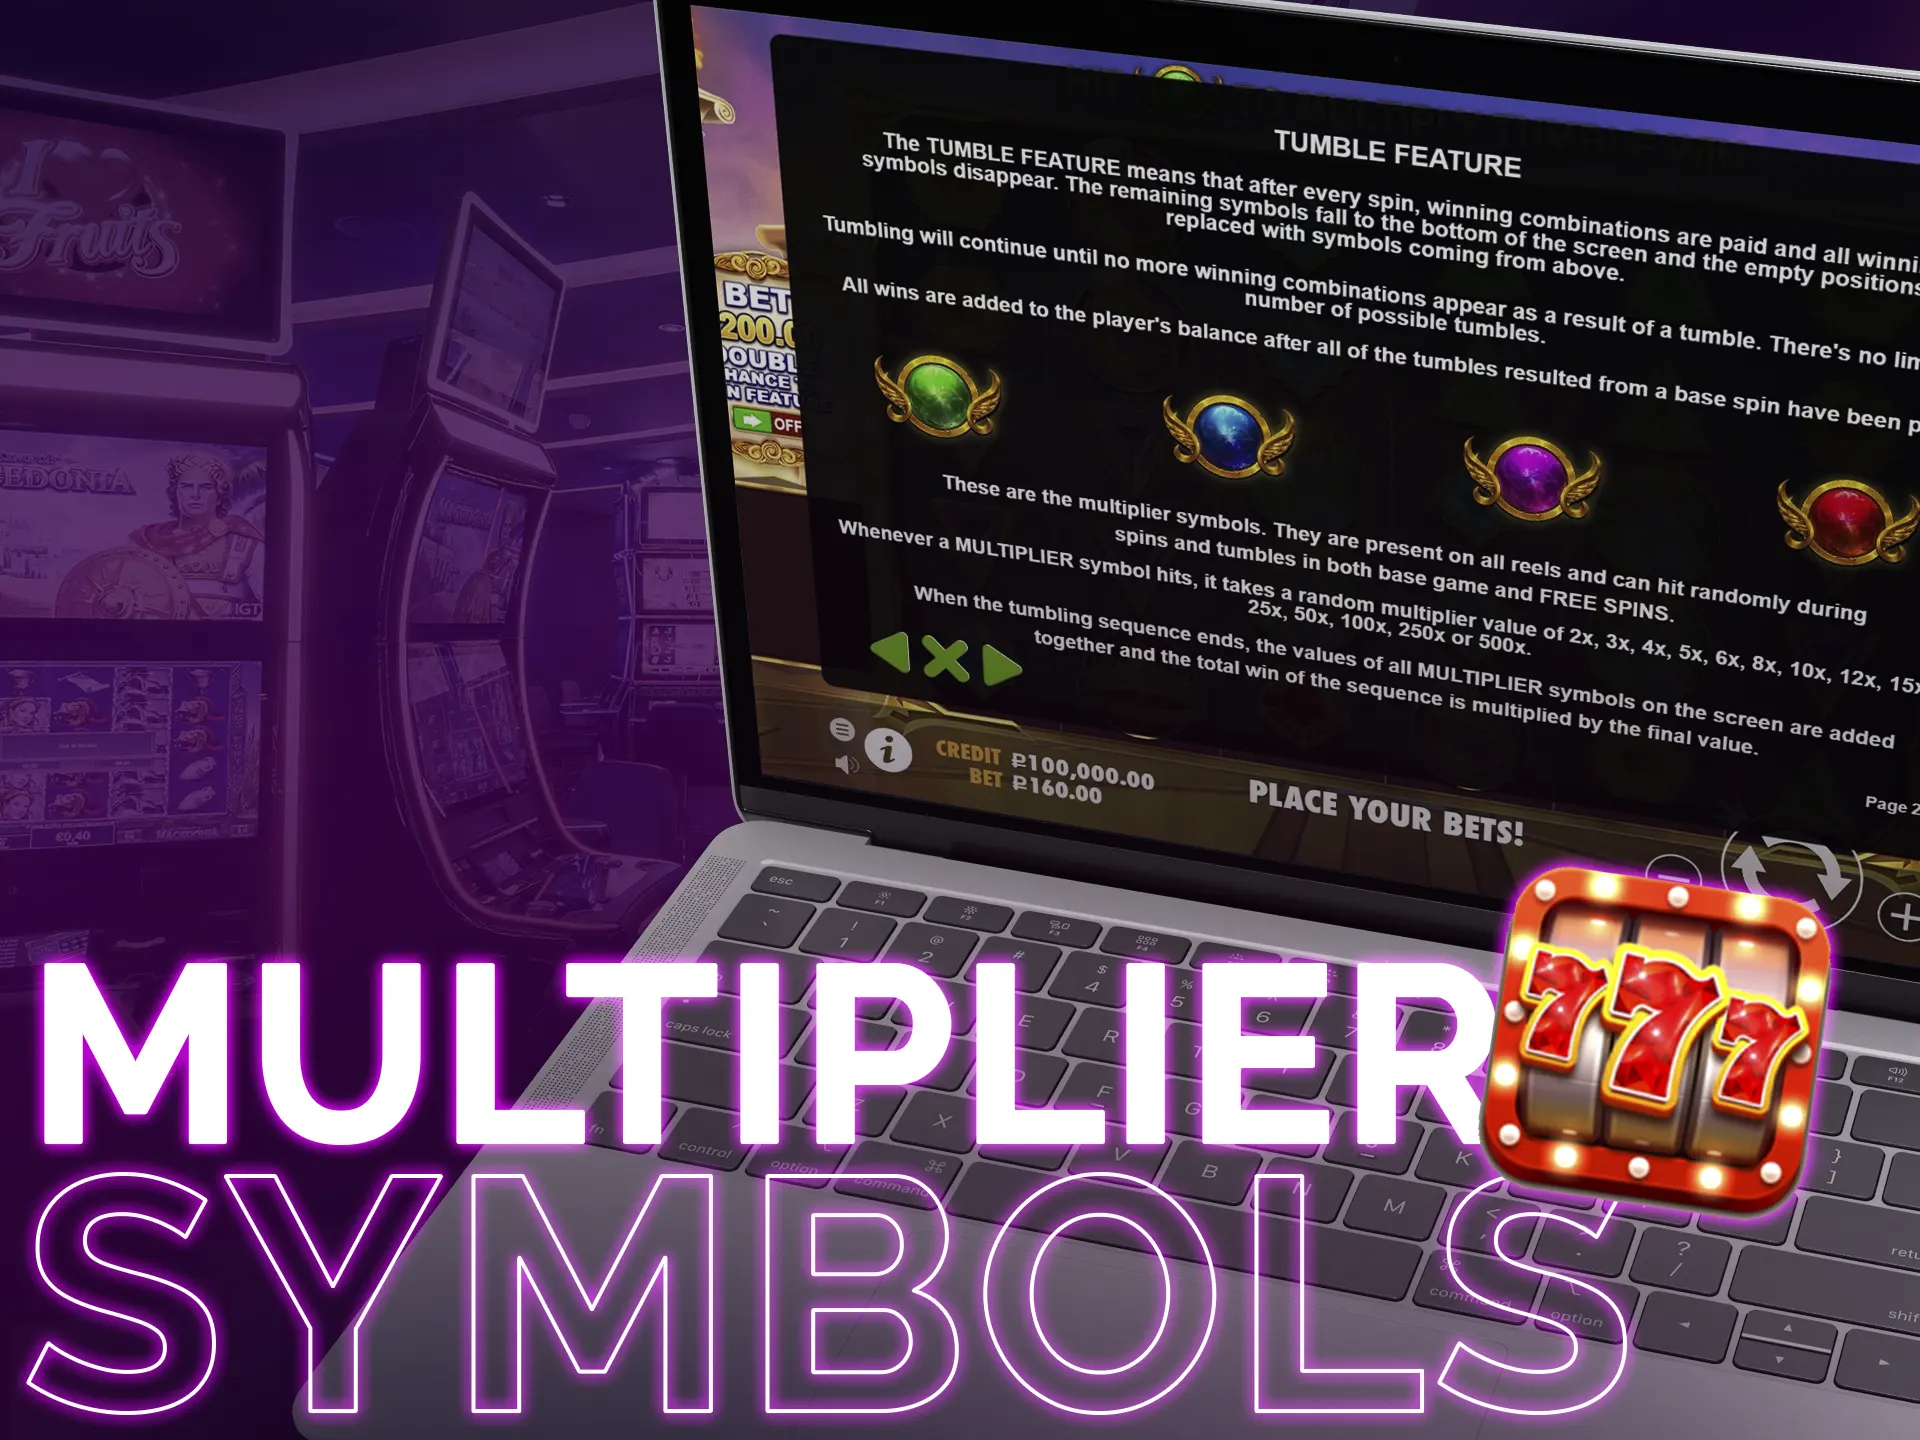 Multiplier symbols boost wins, either once or cumulatively during bonuses.